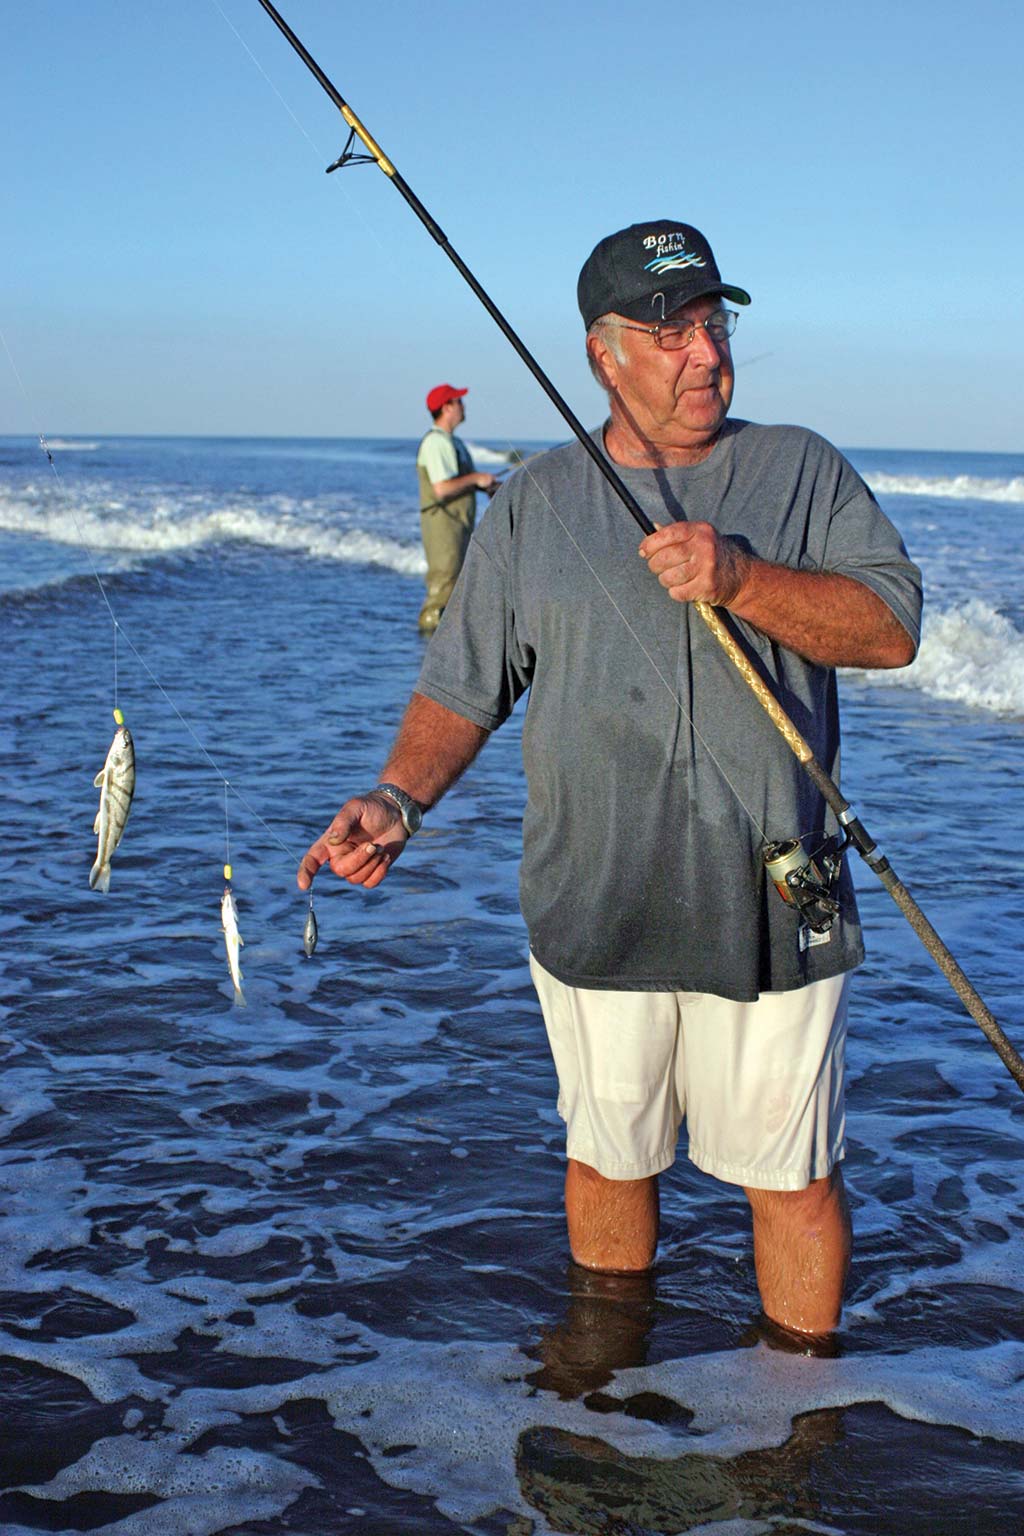 Surf Fishing Hooks - Best Hook Types and Size for Beach Fishing